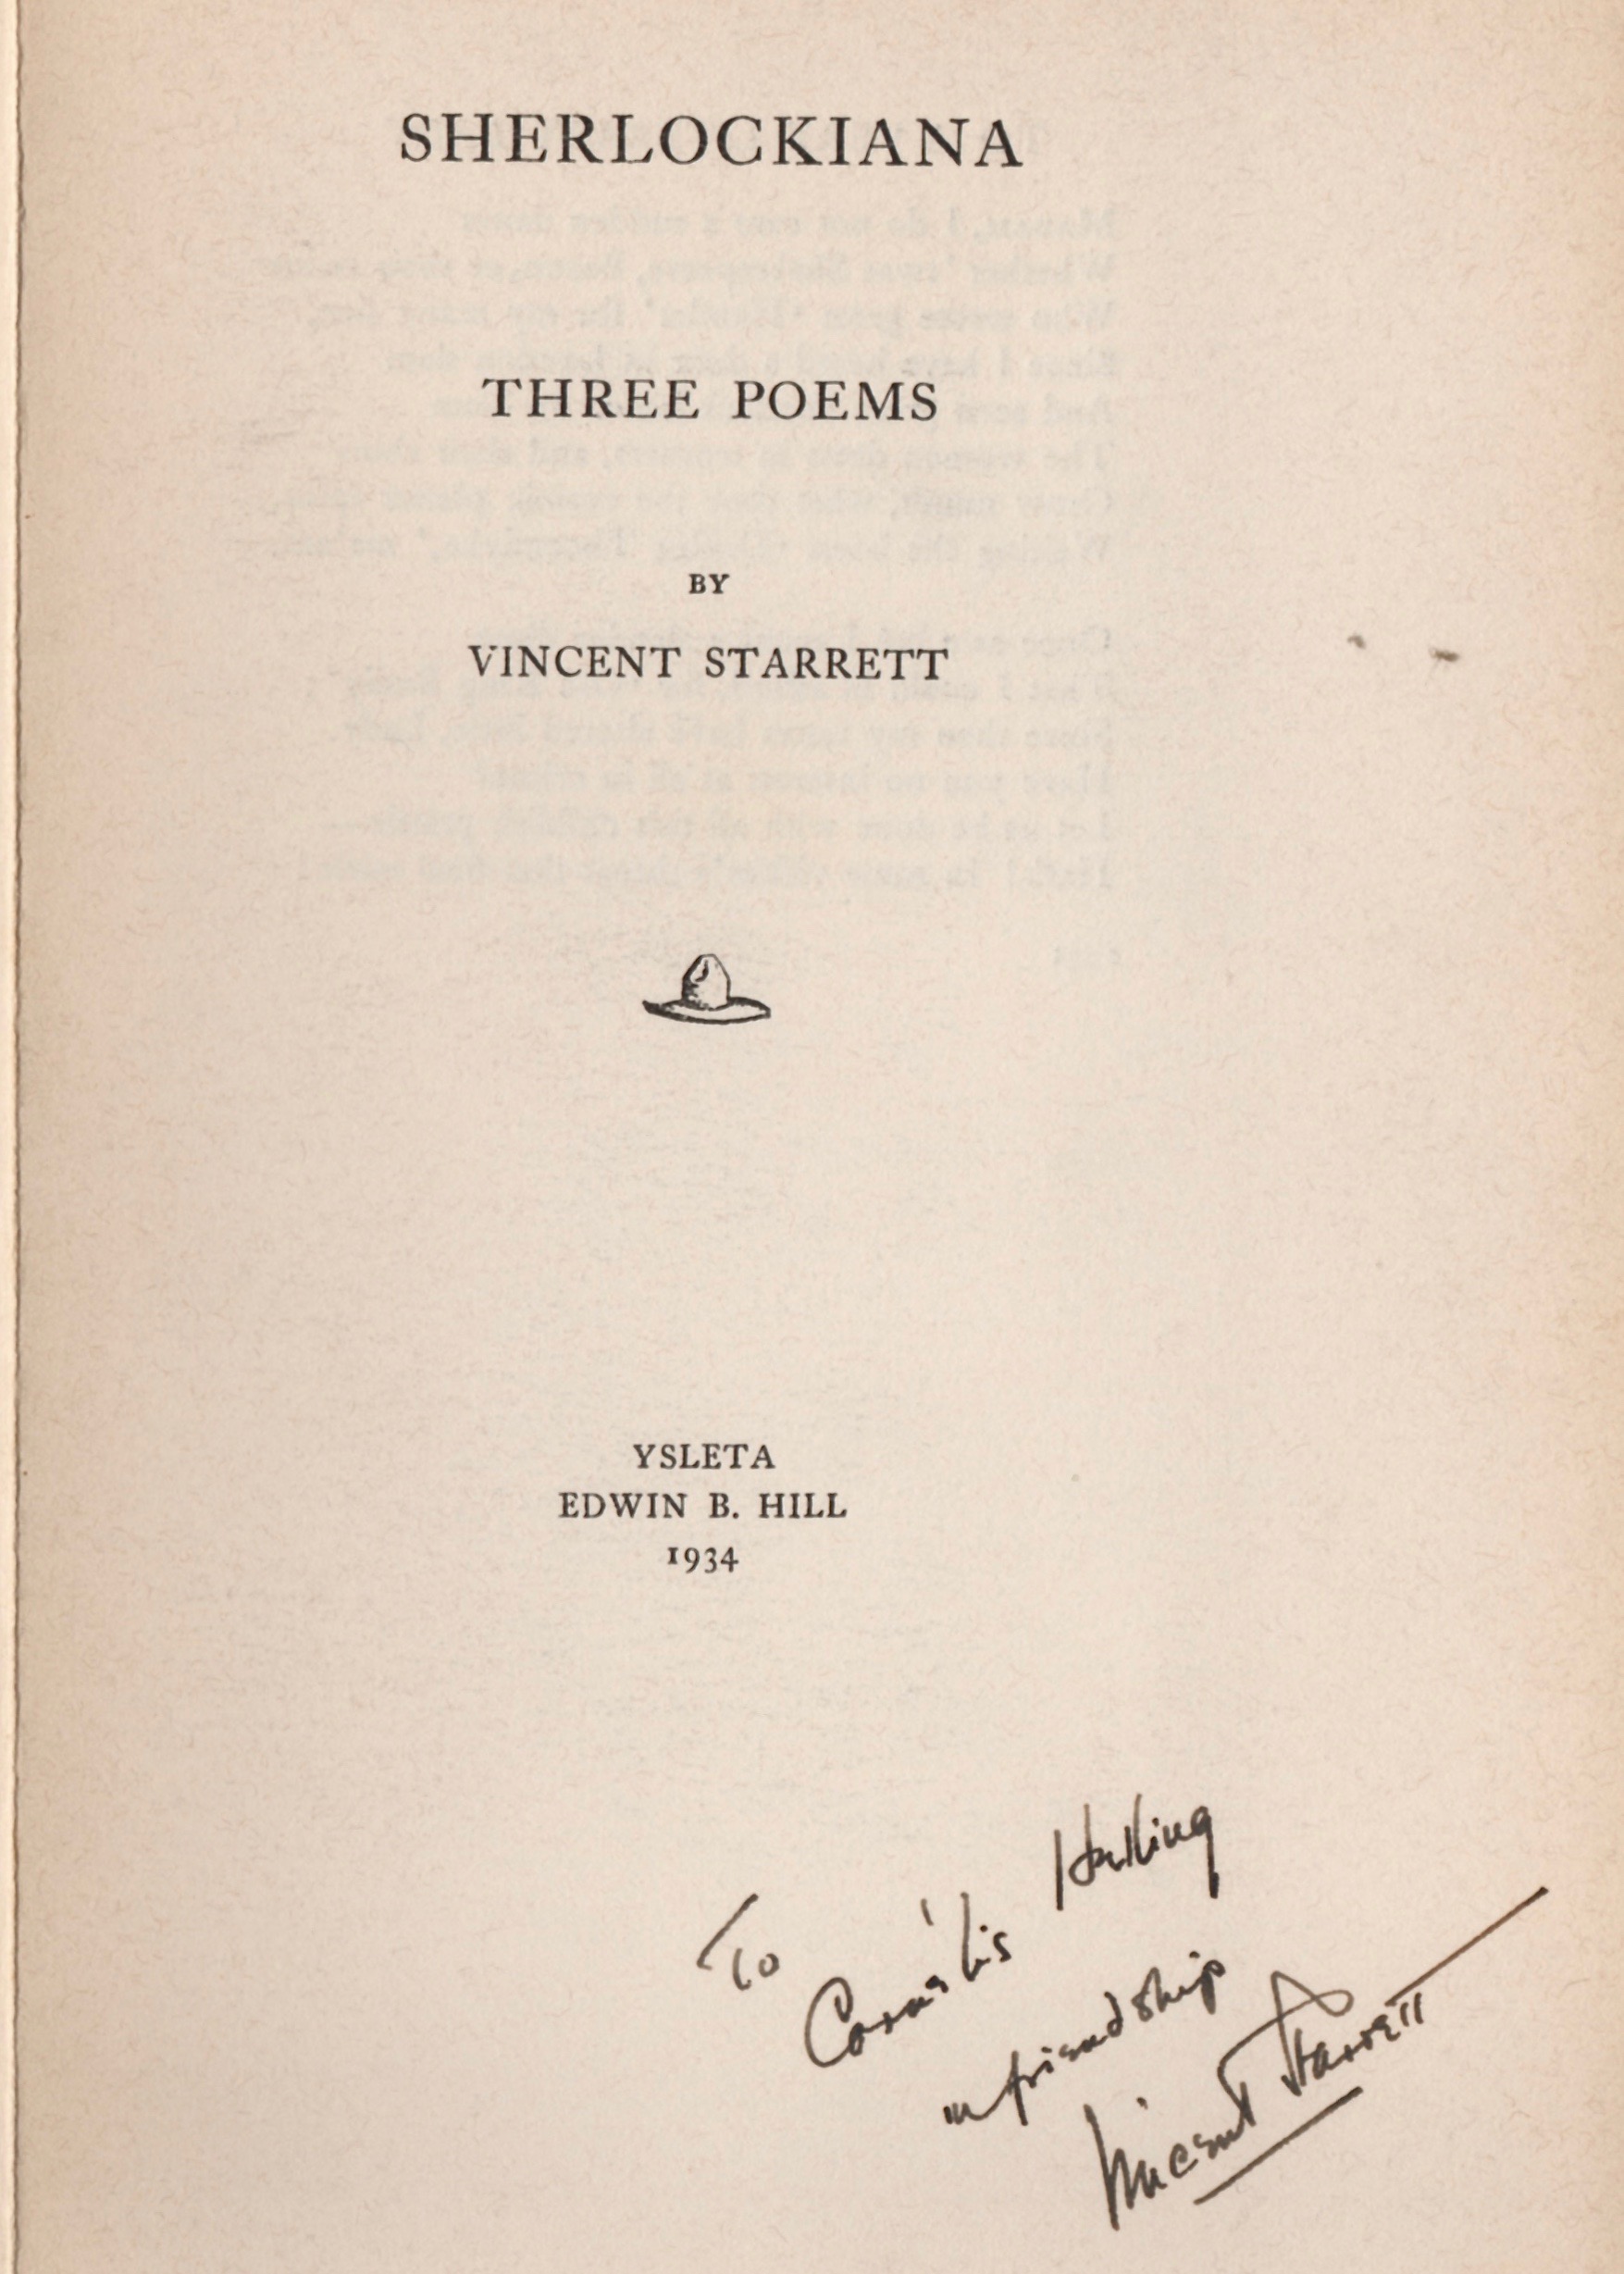  An earlier example of Sherlockiana produced by Edwin B. Hill for Vincent Starrett. “Three Poems” was printed in 1934, eight years before the leaflet that carried “221B.” 